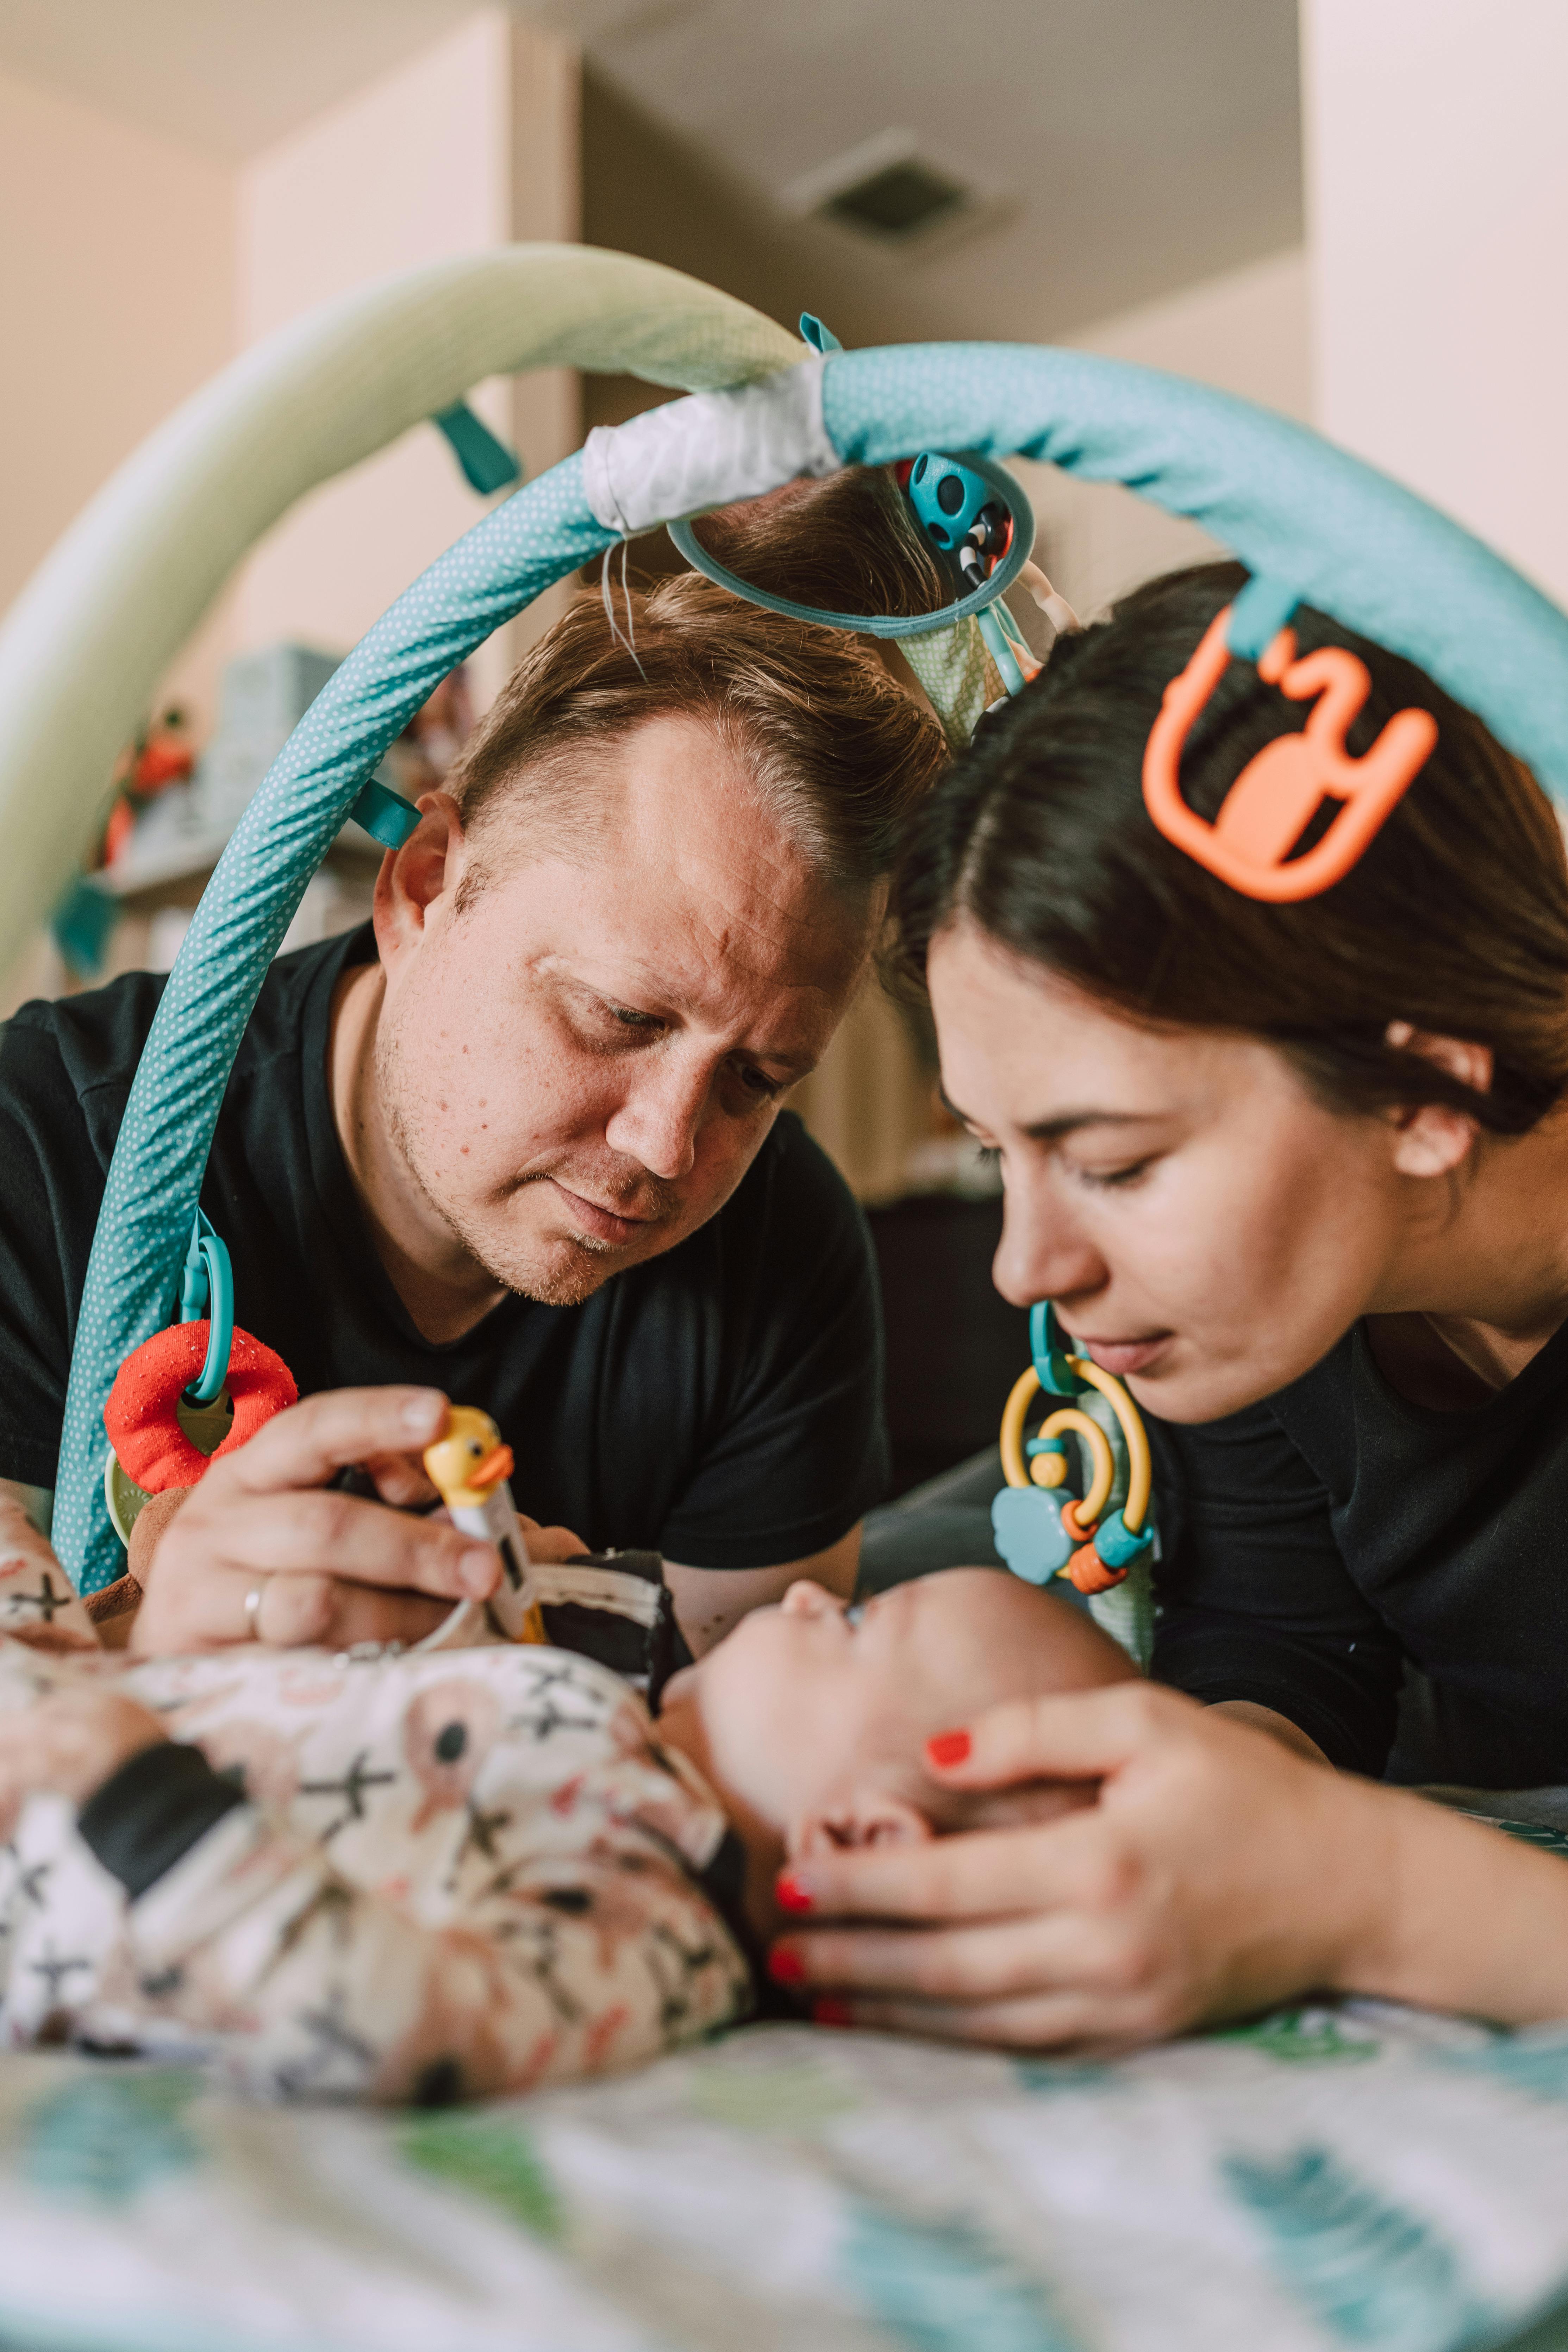 A couple playing with their baby | Source: Pexels